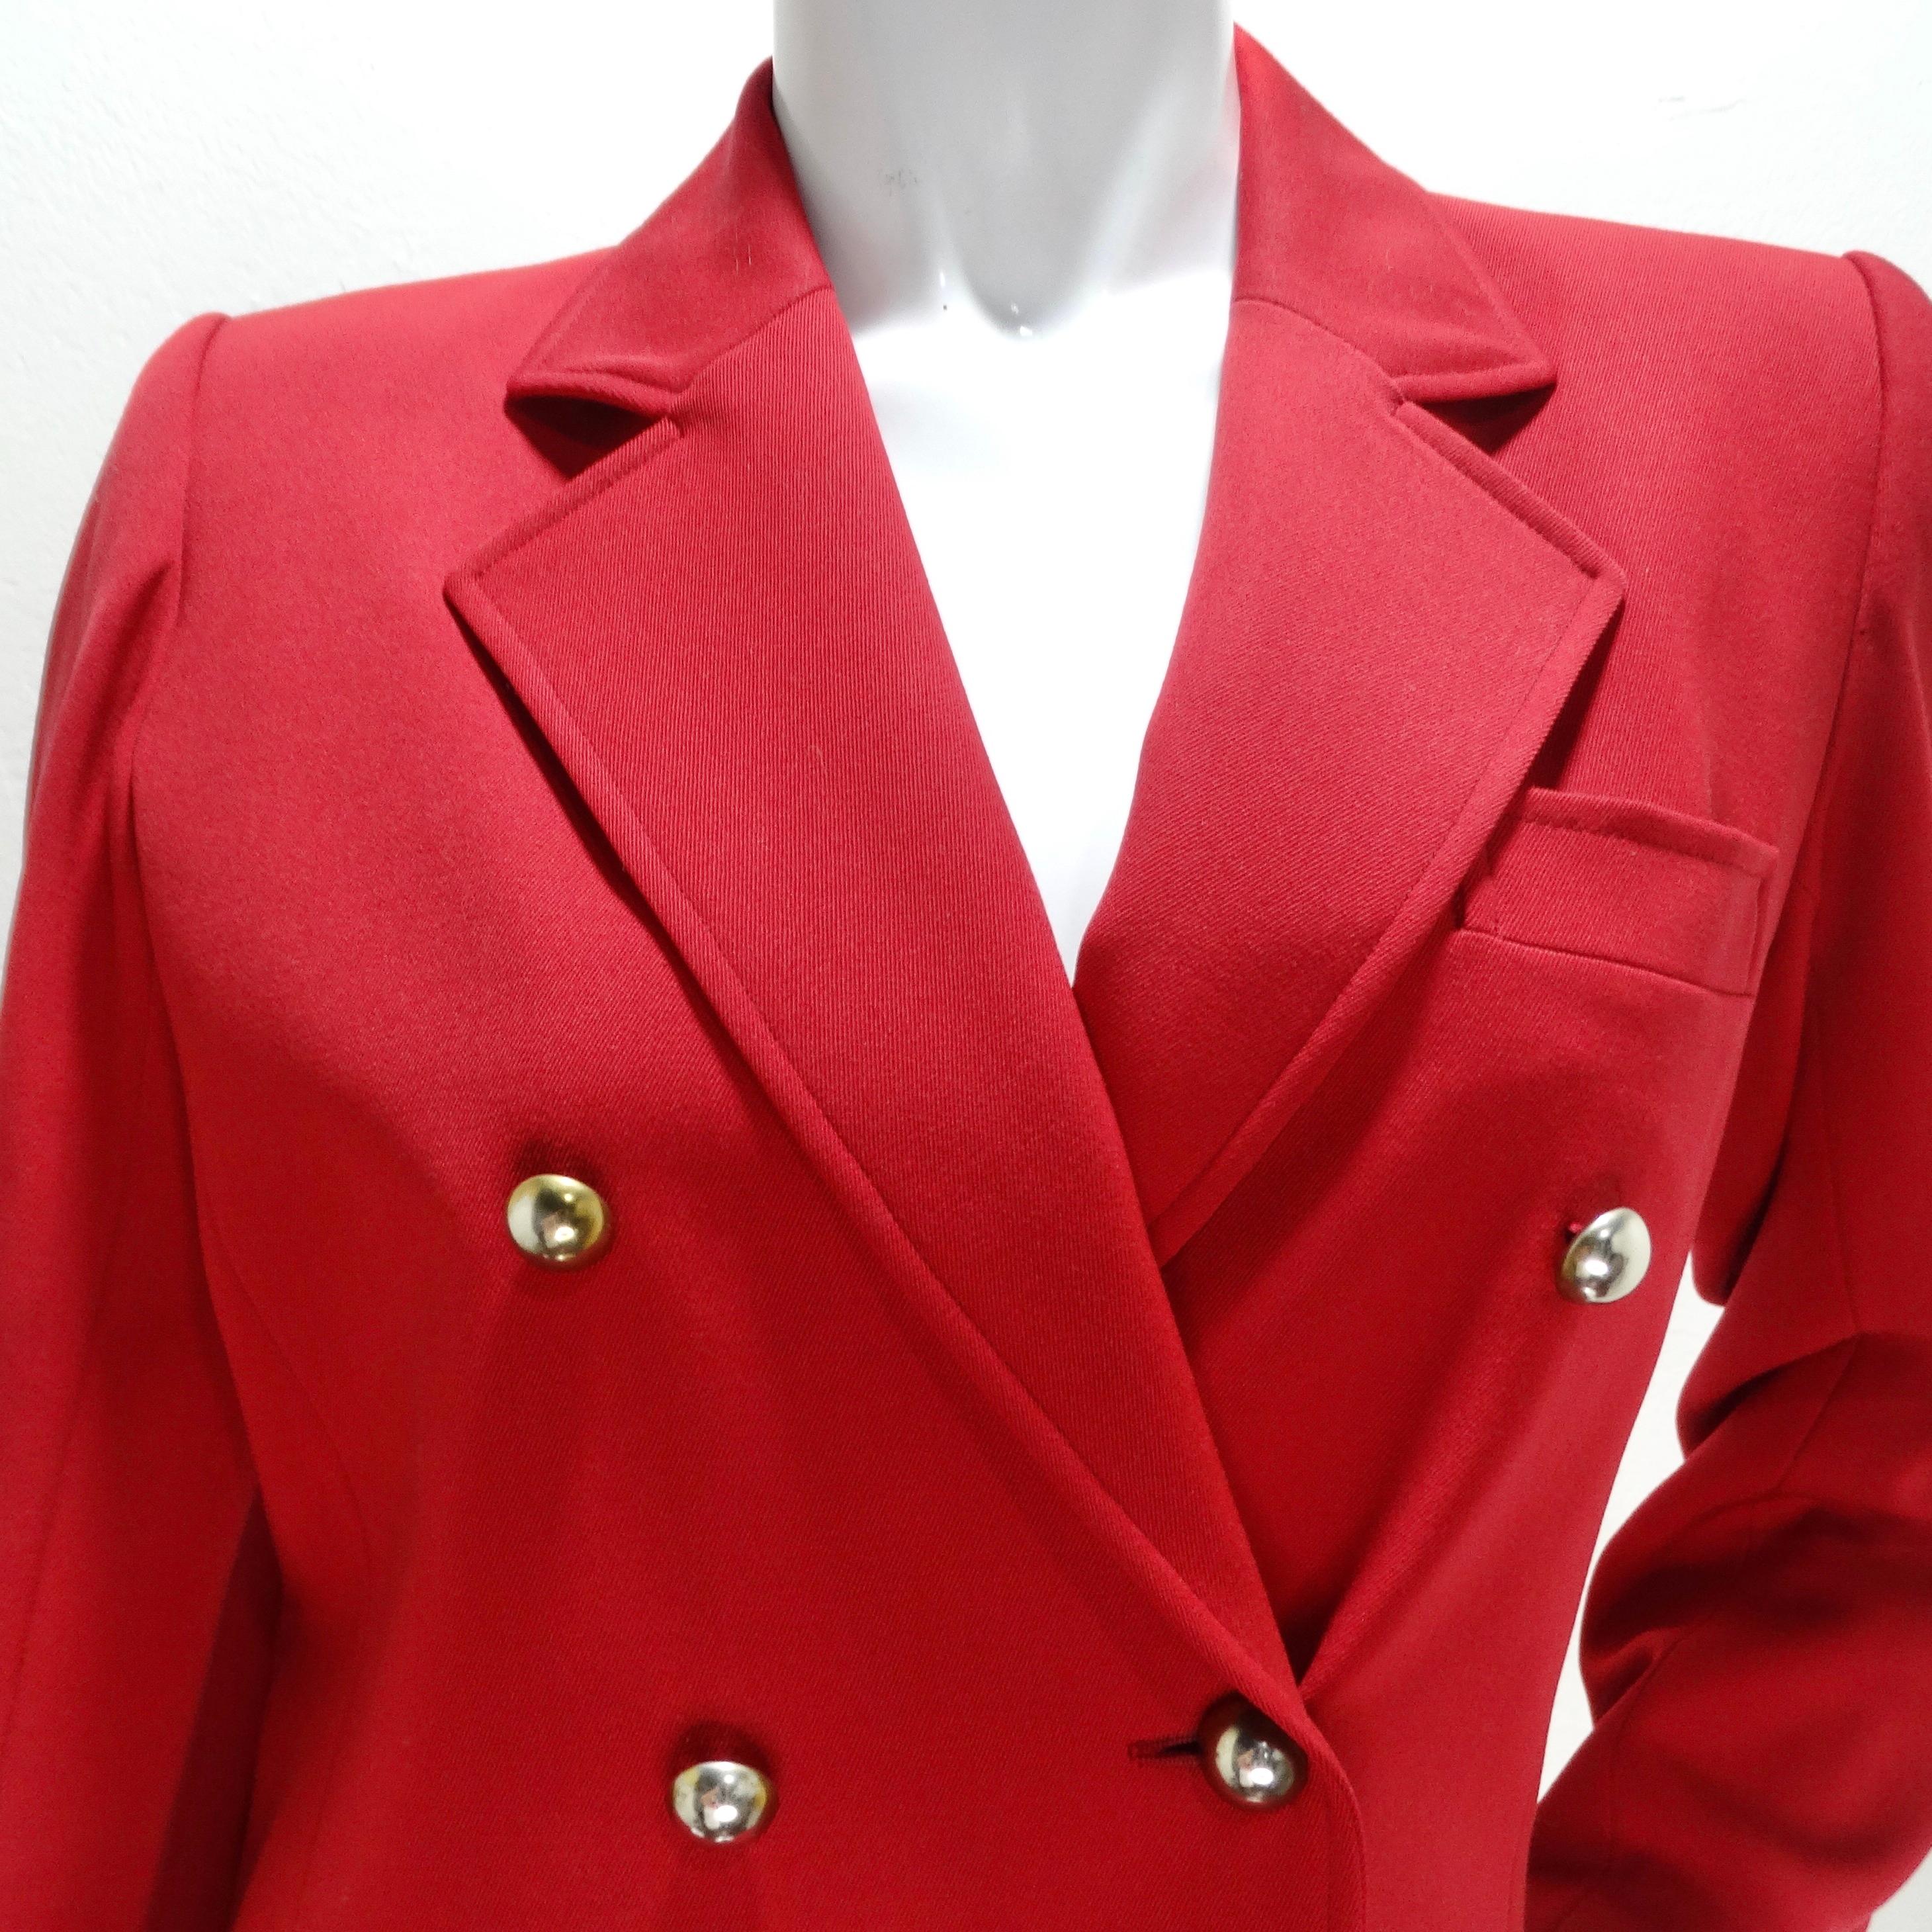 Elevate your style with this striking Yves Saint Laurent 1980s Red Blazer, a classic women's blazer with a twist of 1980s flair. This statement piece features a structured collar, center pockets, and gold-tone buttons with a mirror-like effect that